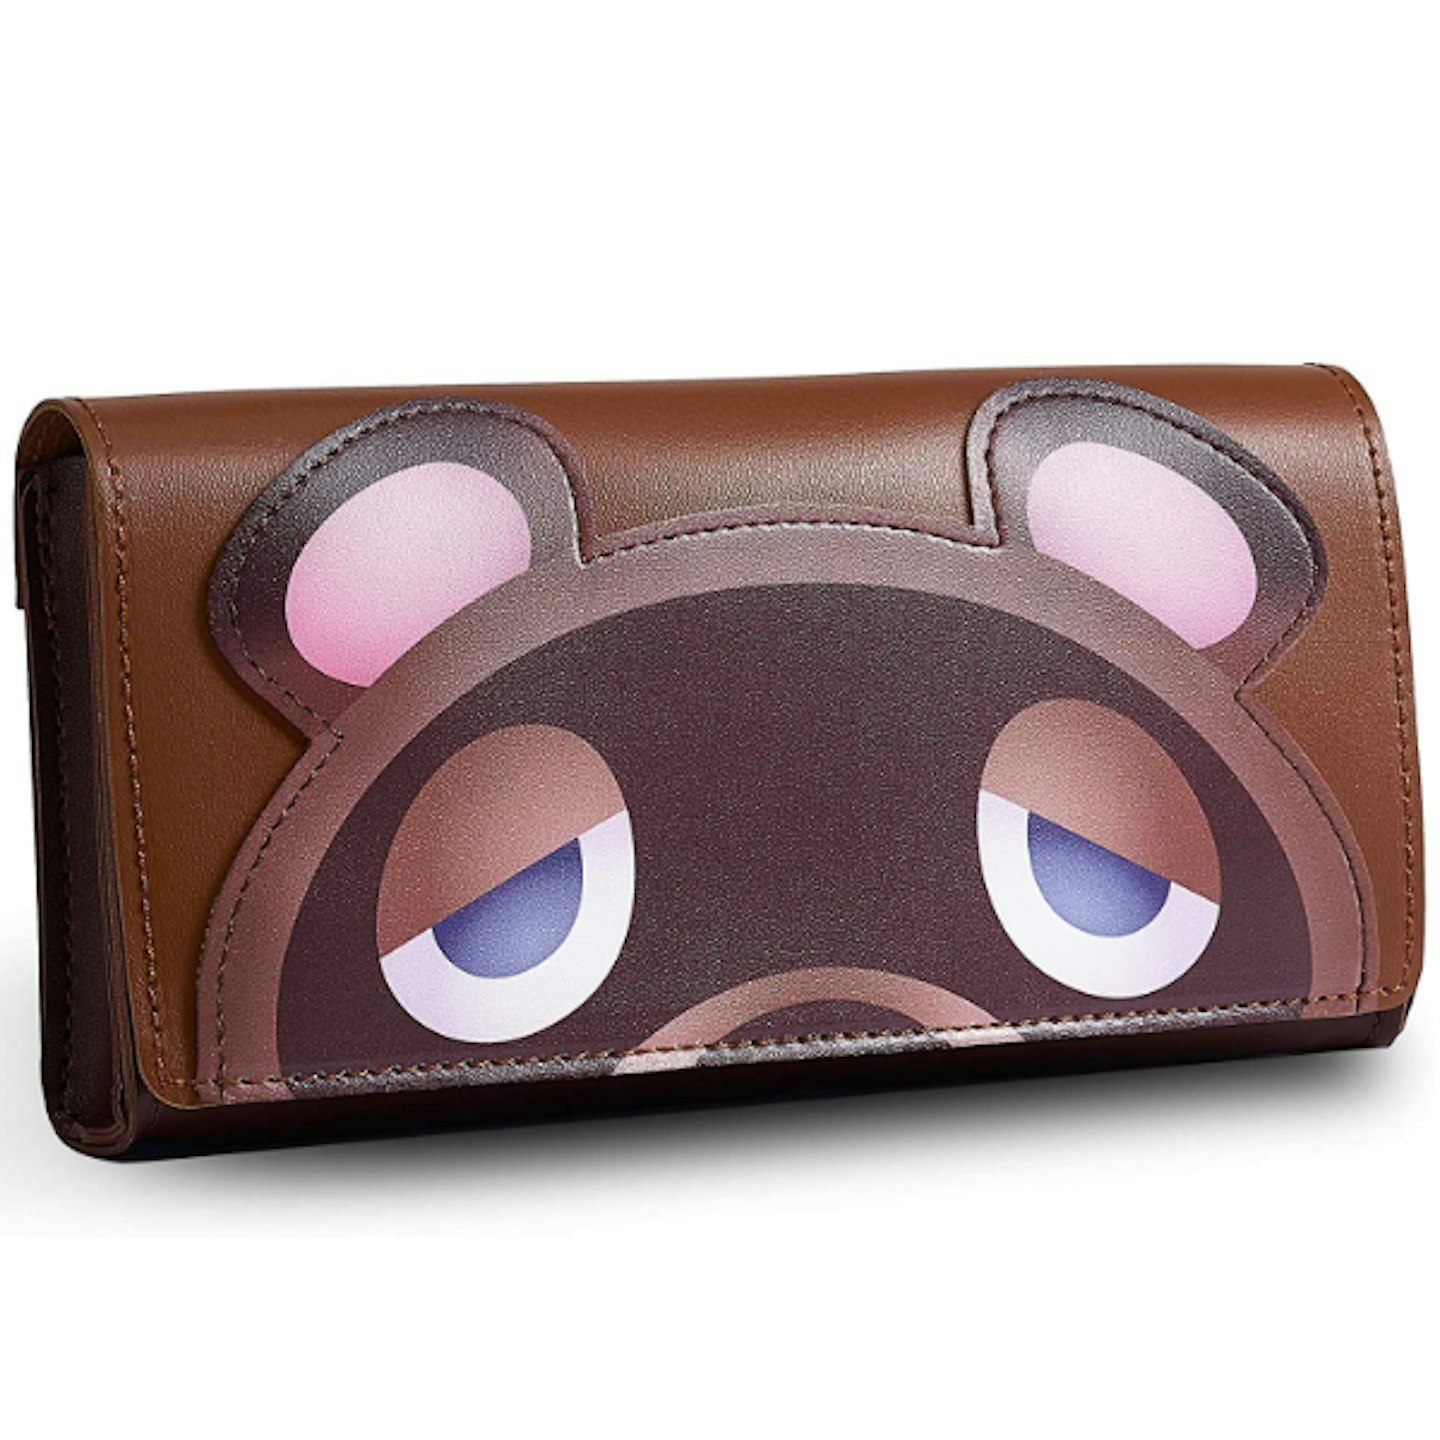 Funlab Ultra Slim Carry Case for Switch Lite – Tom Nook, Animal Crossing